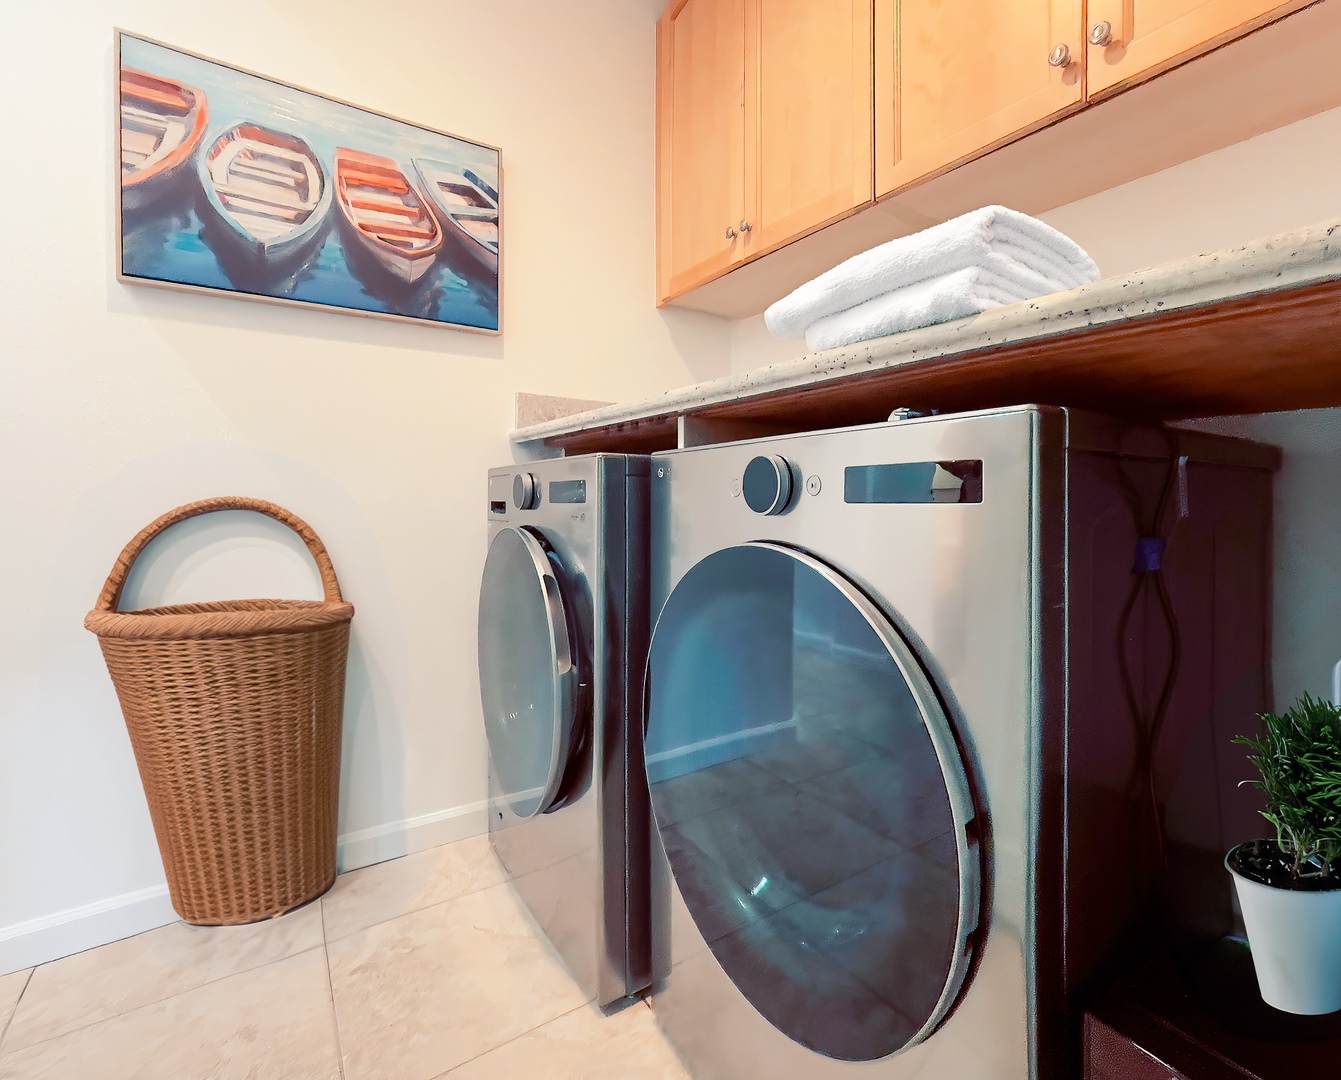 Kamuela Vacation Rentals, Mauna Lani Fairways #603 - Downstairs laundry area with a washer/dryer and direct access to garage.